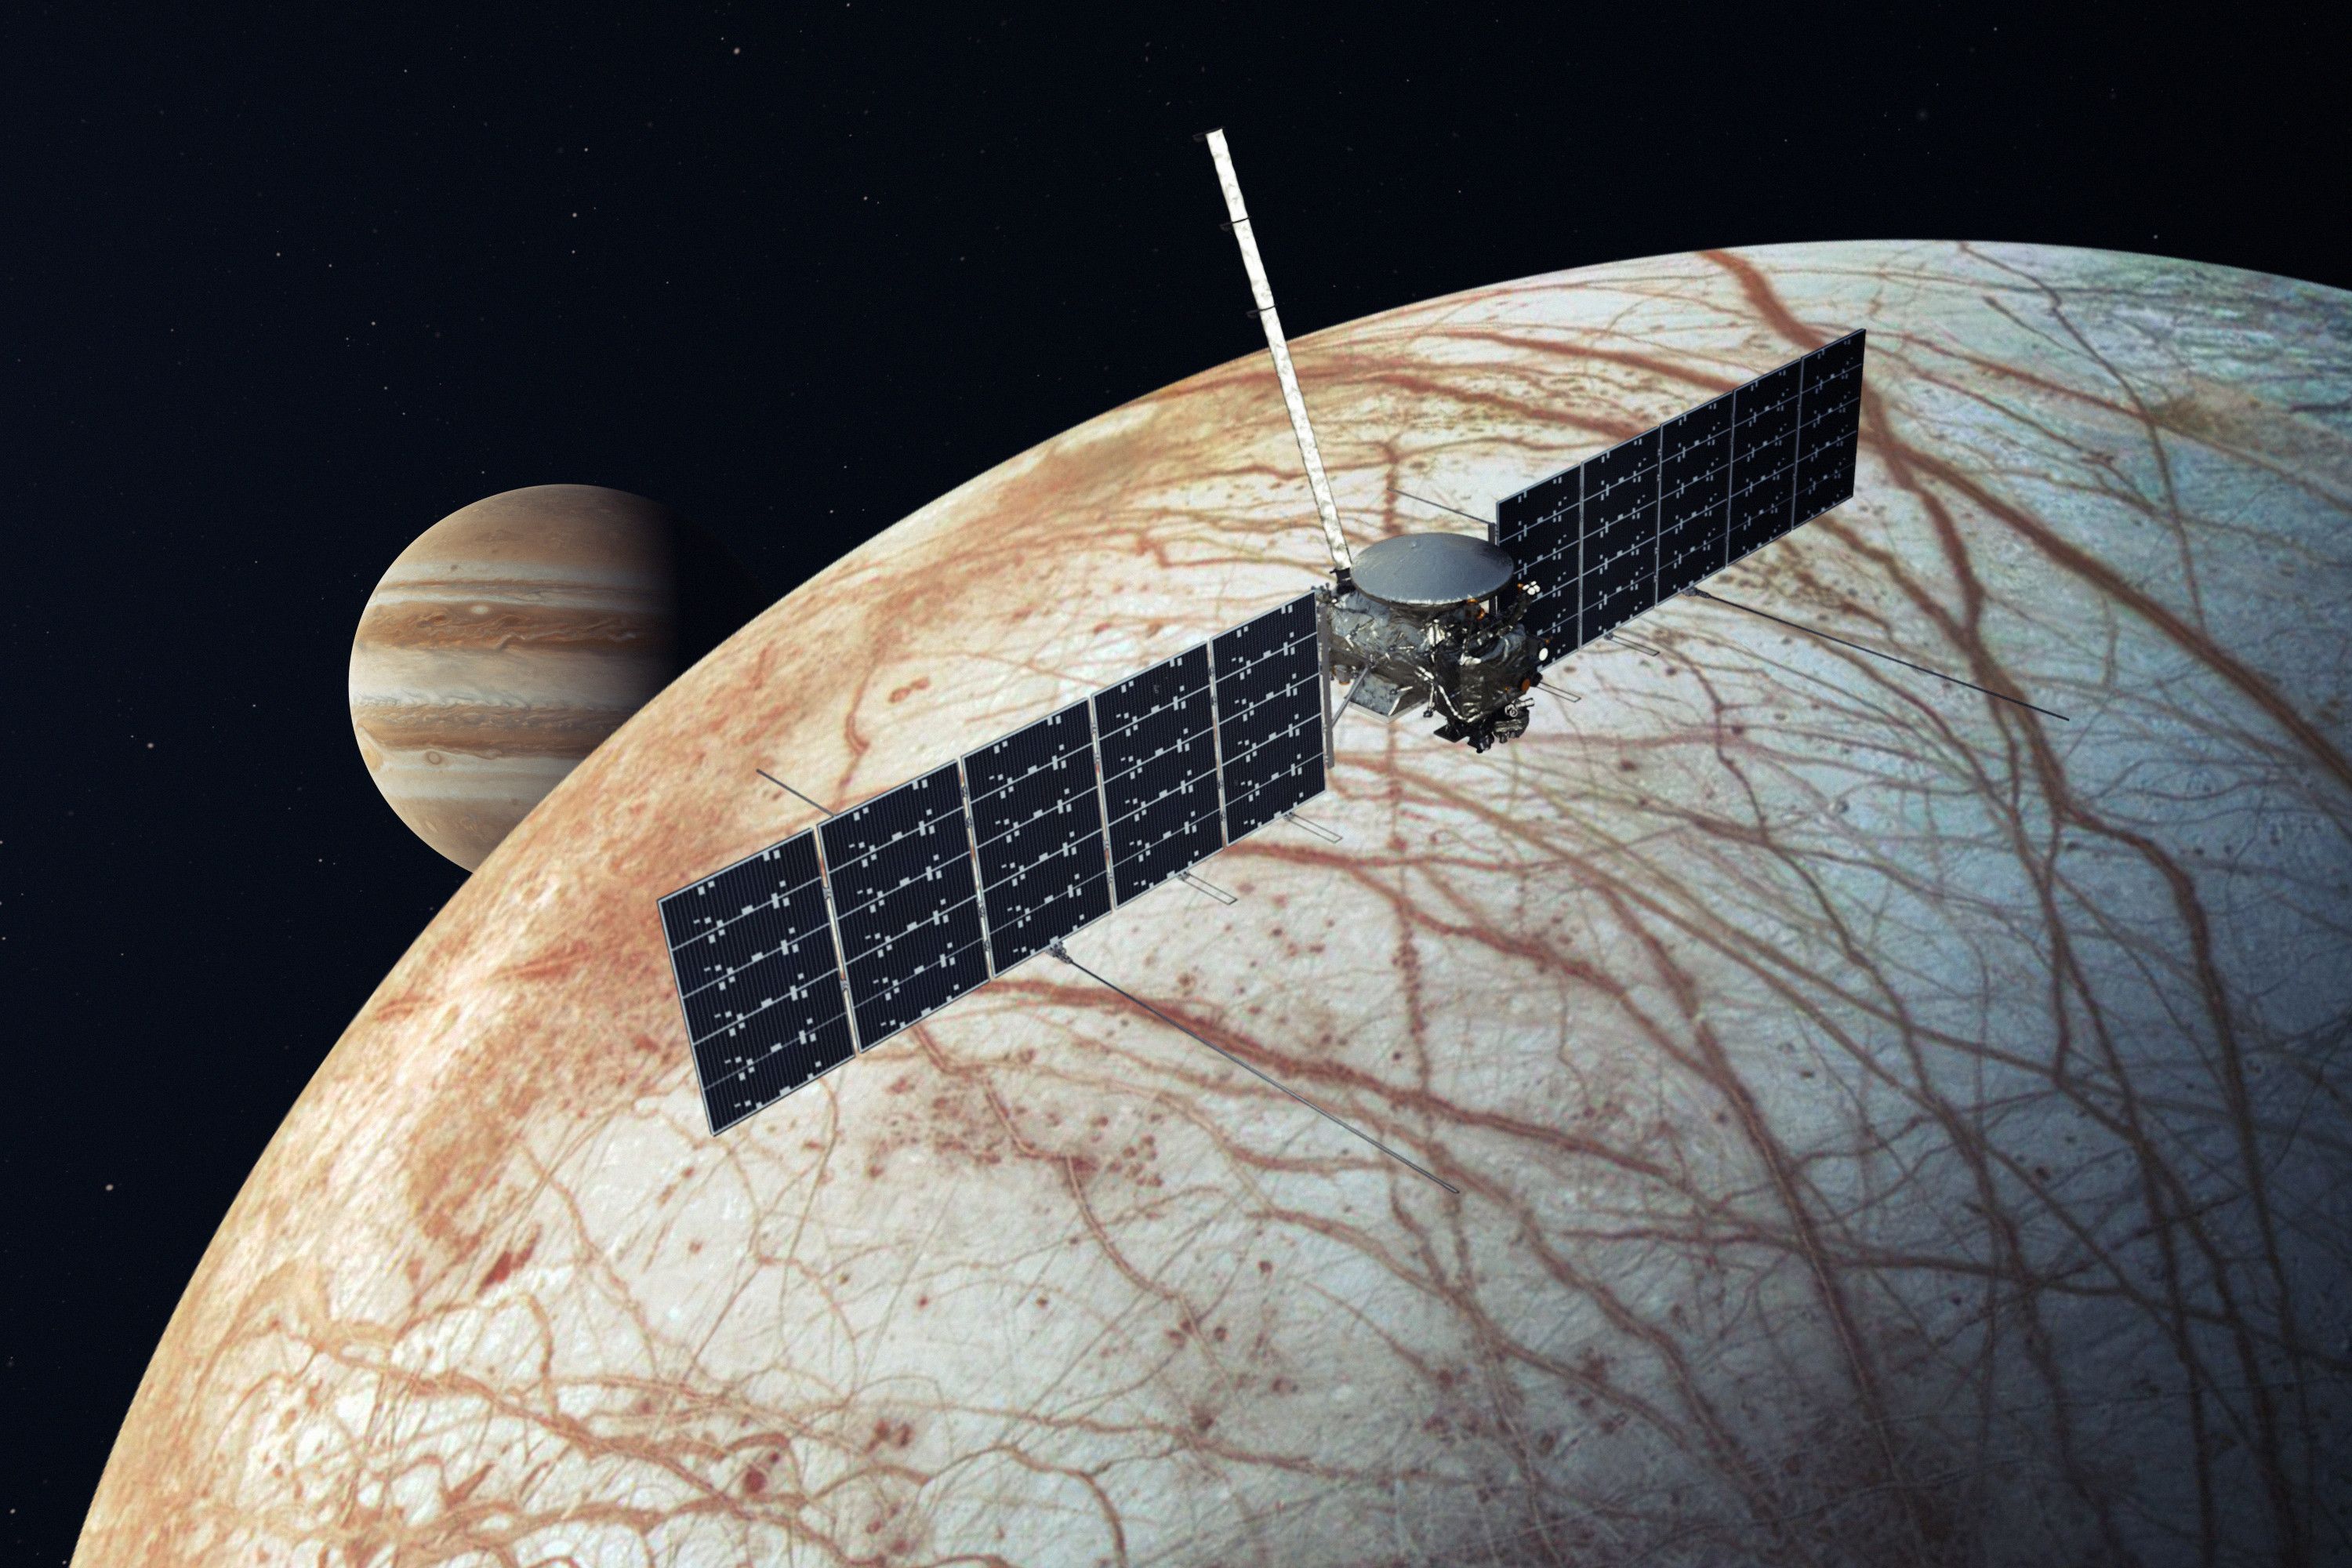 The concept art of the Europa Clipper mission under development showing a satellite in space next to Jupiter and the icy moon Europa